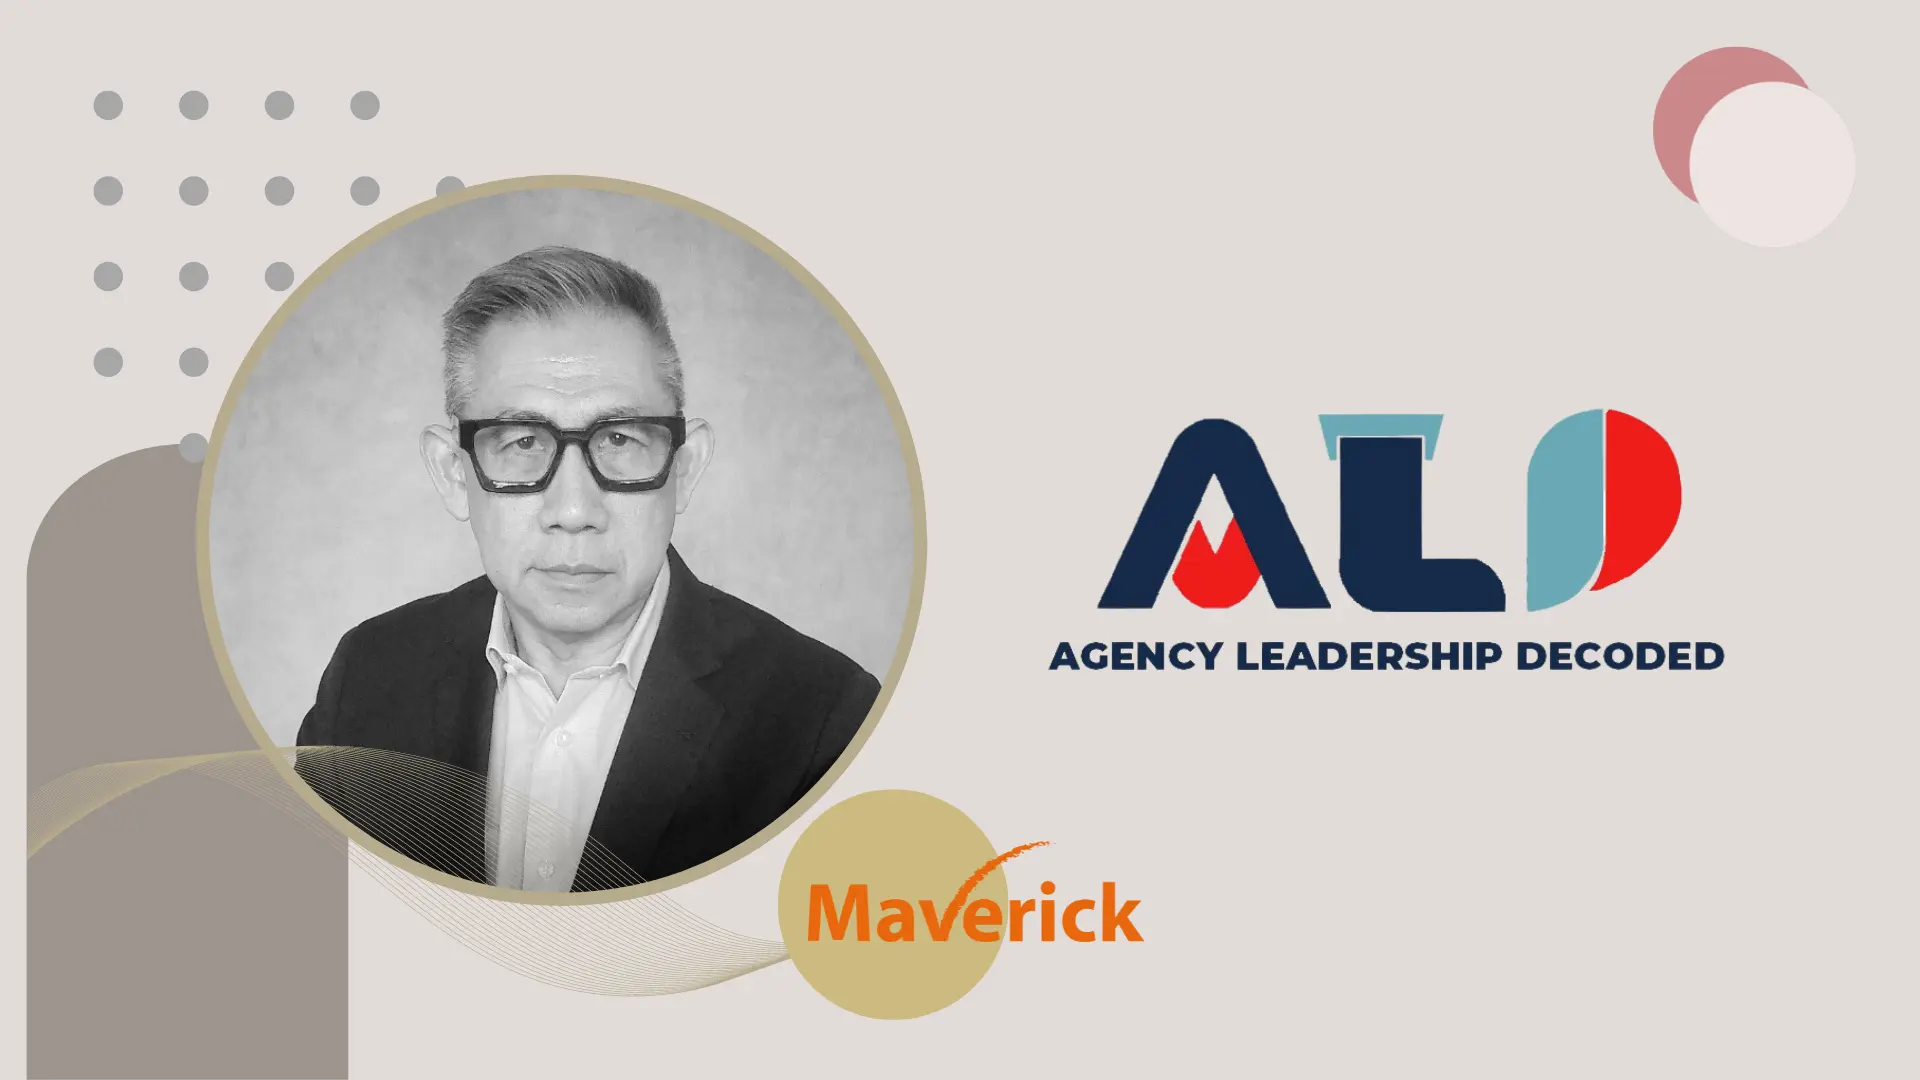 Agency Leadership Decoded: Maverick Indonesia’s Ong Hock Chuan on leading an agency with purpose